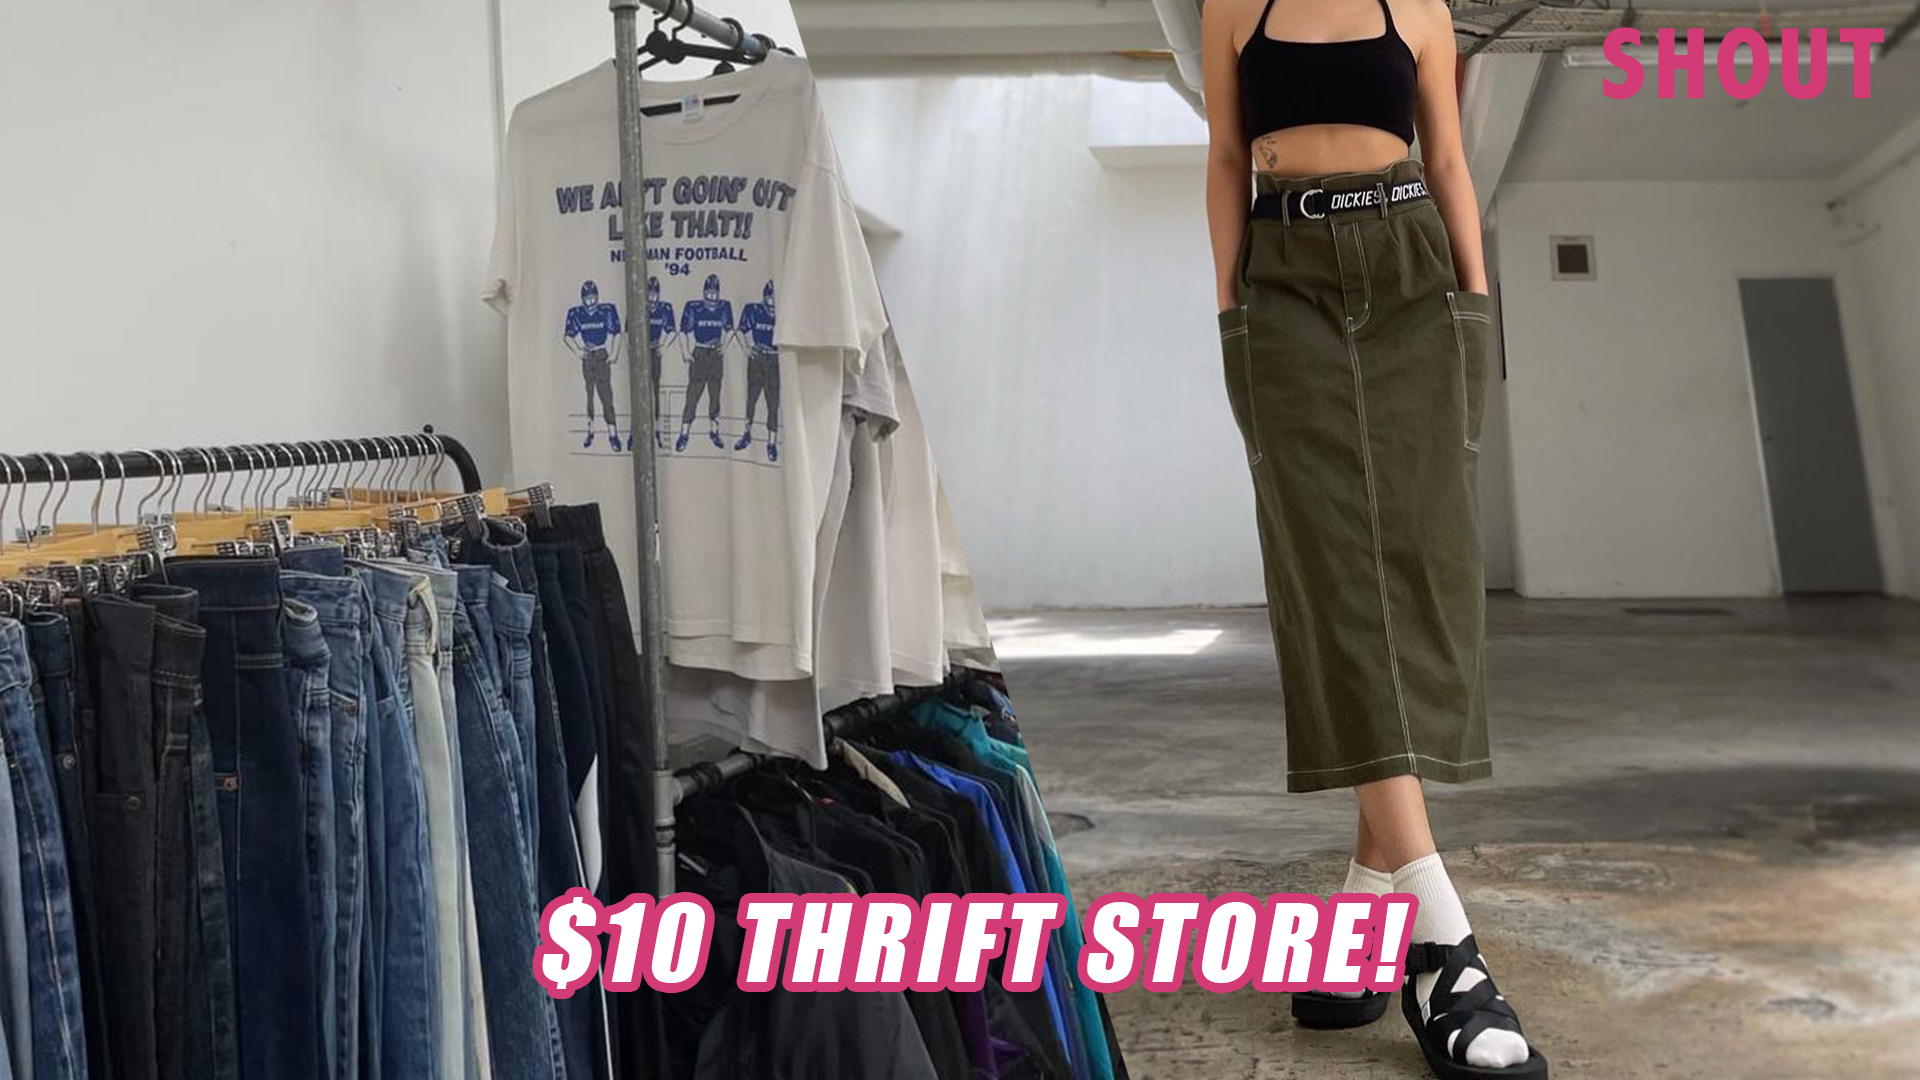 Woofie's Warehouse Is A Thrift Store With Everything For $10